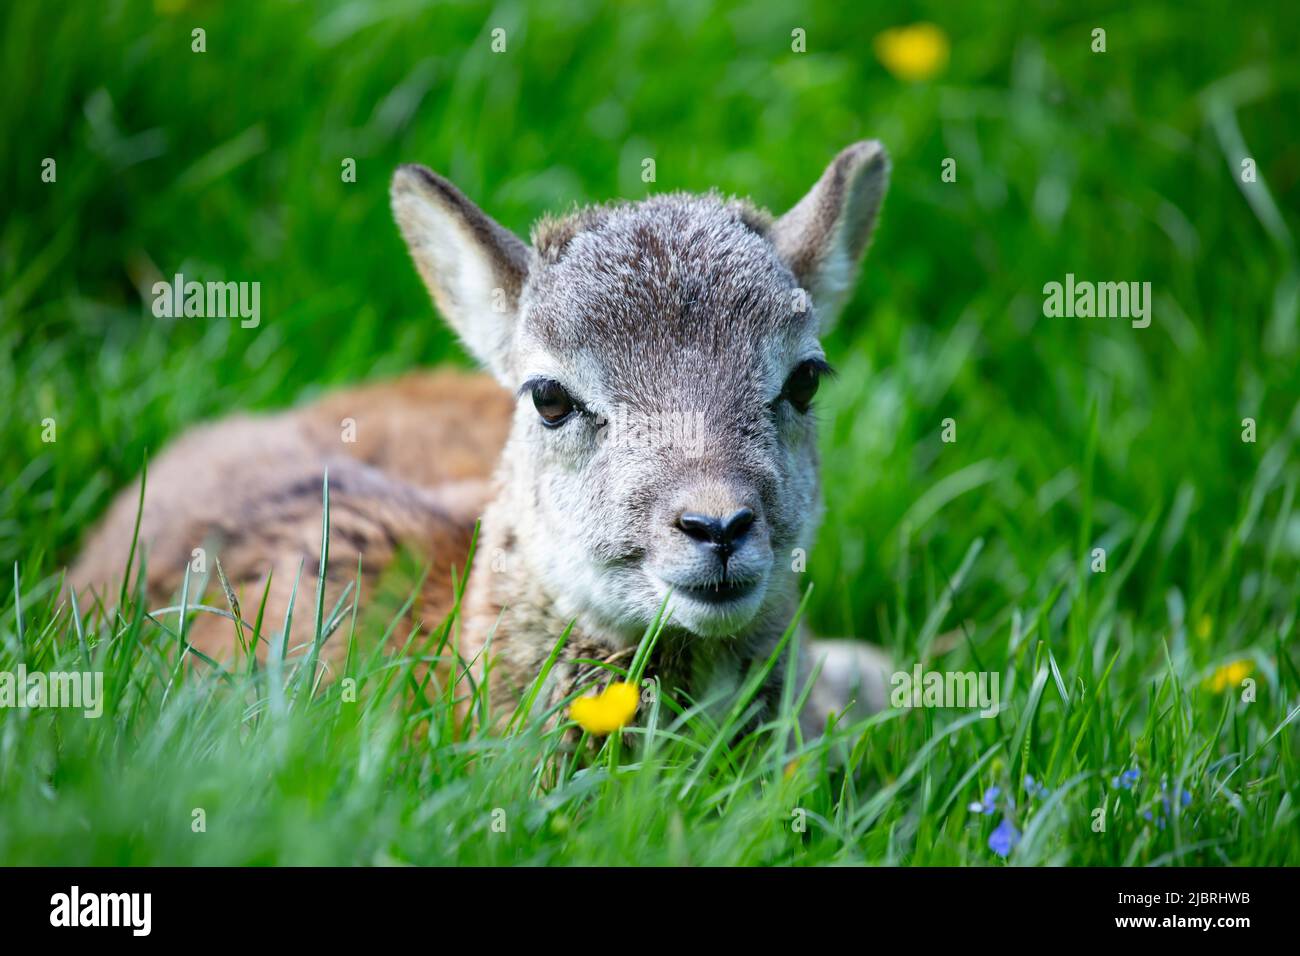 Small cute baby mouflon lying down and relaxing in green grass.Adorable mouflon fawn, wildlife, baby animals Stock Photo